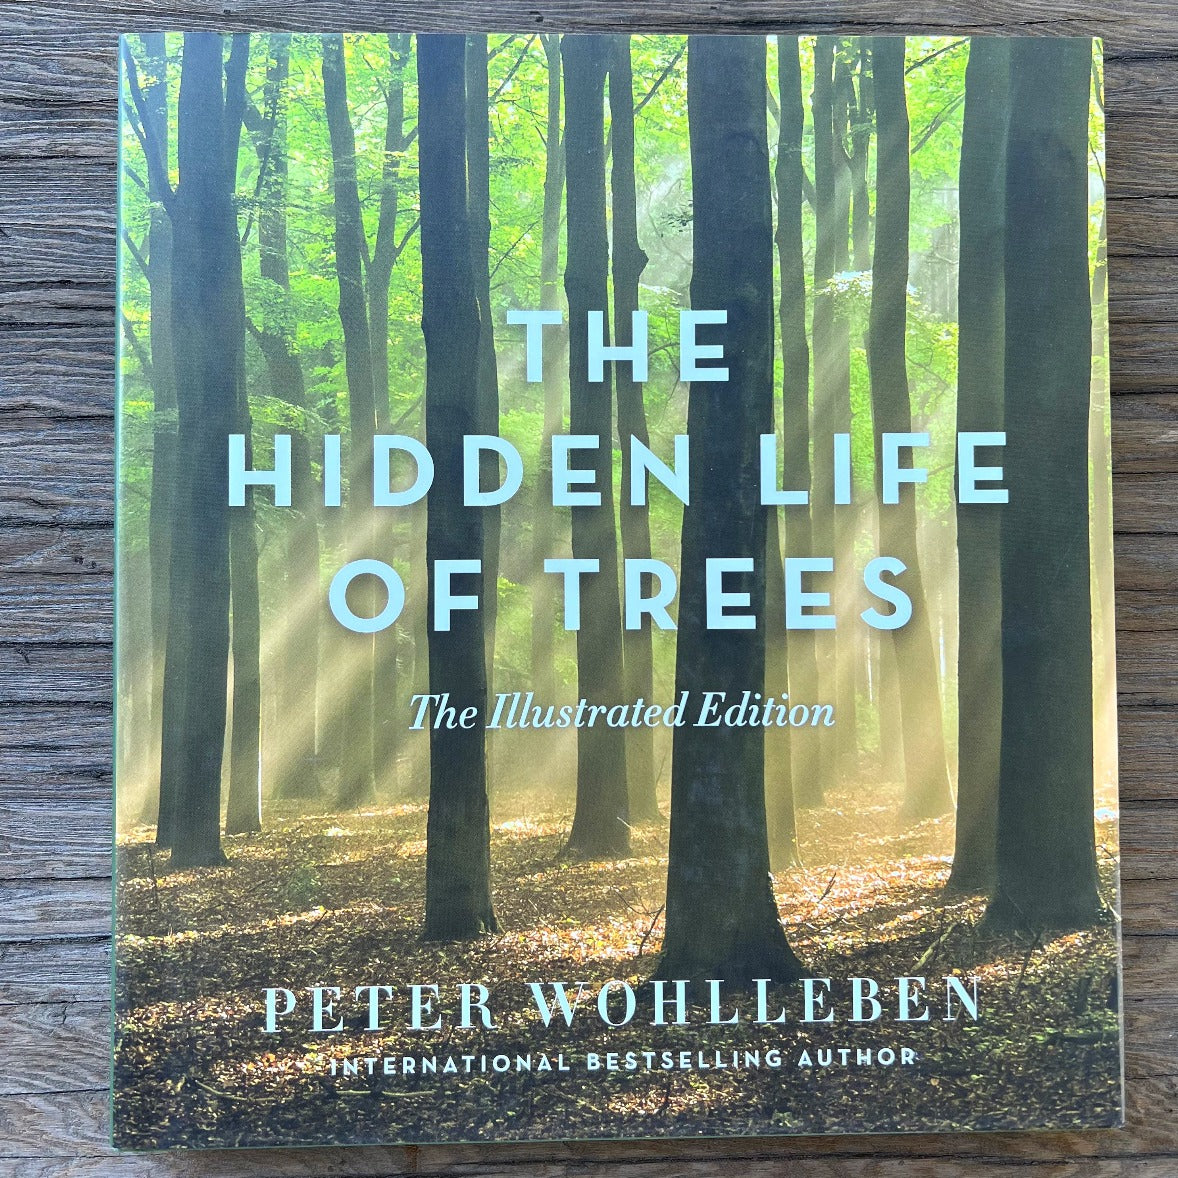 The Hidden Life of Trees - Illustrated Edition by Peter Wohlleben